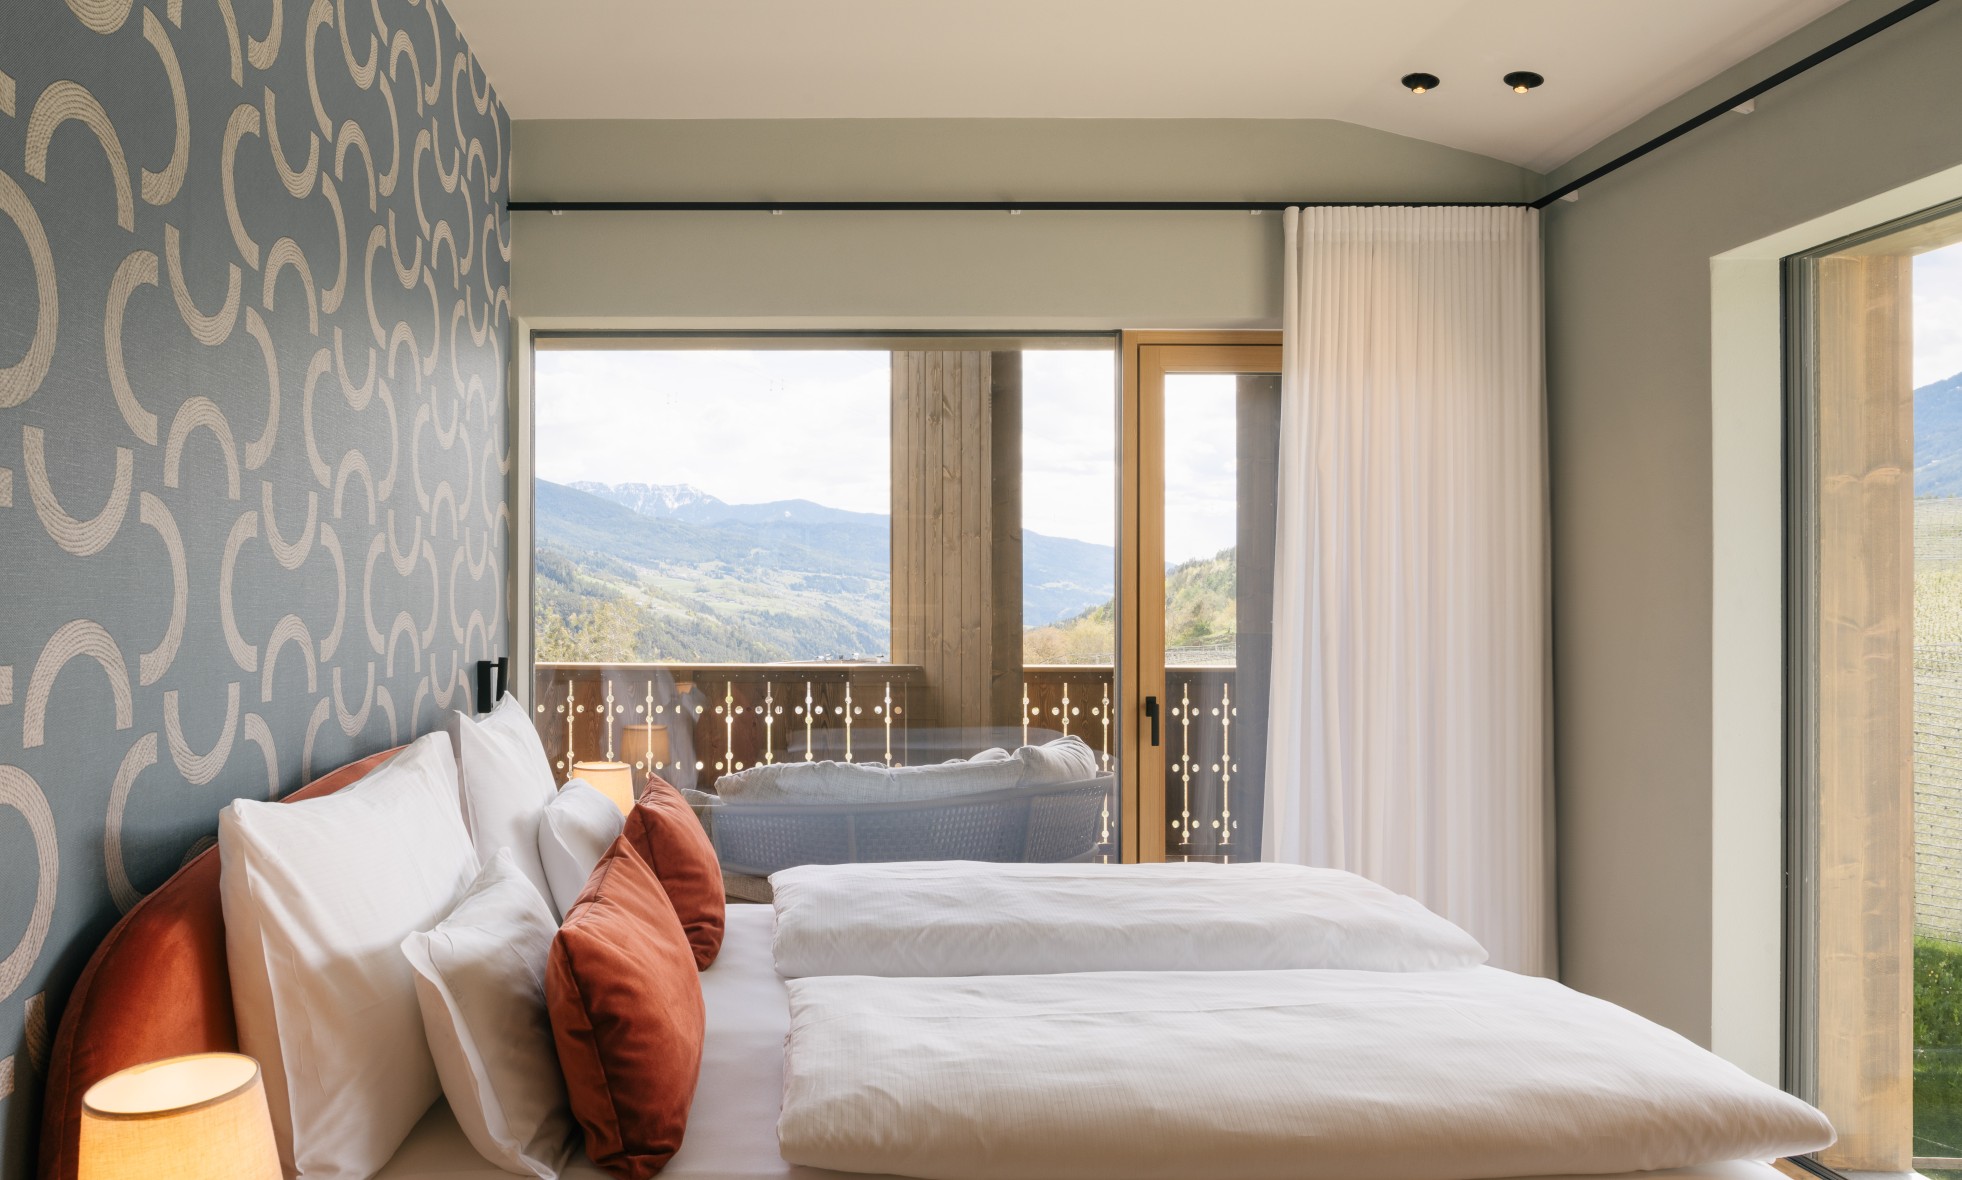 Luxury bedroom apartment rental properties in Italy Dolomites vacation house